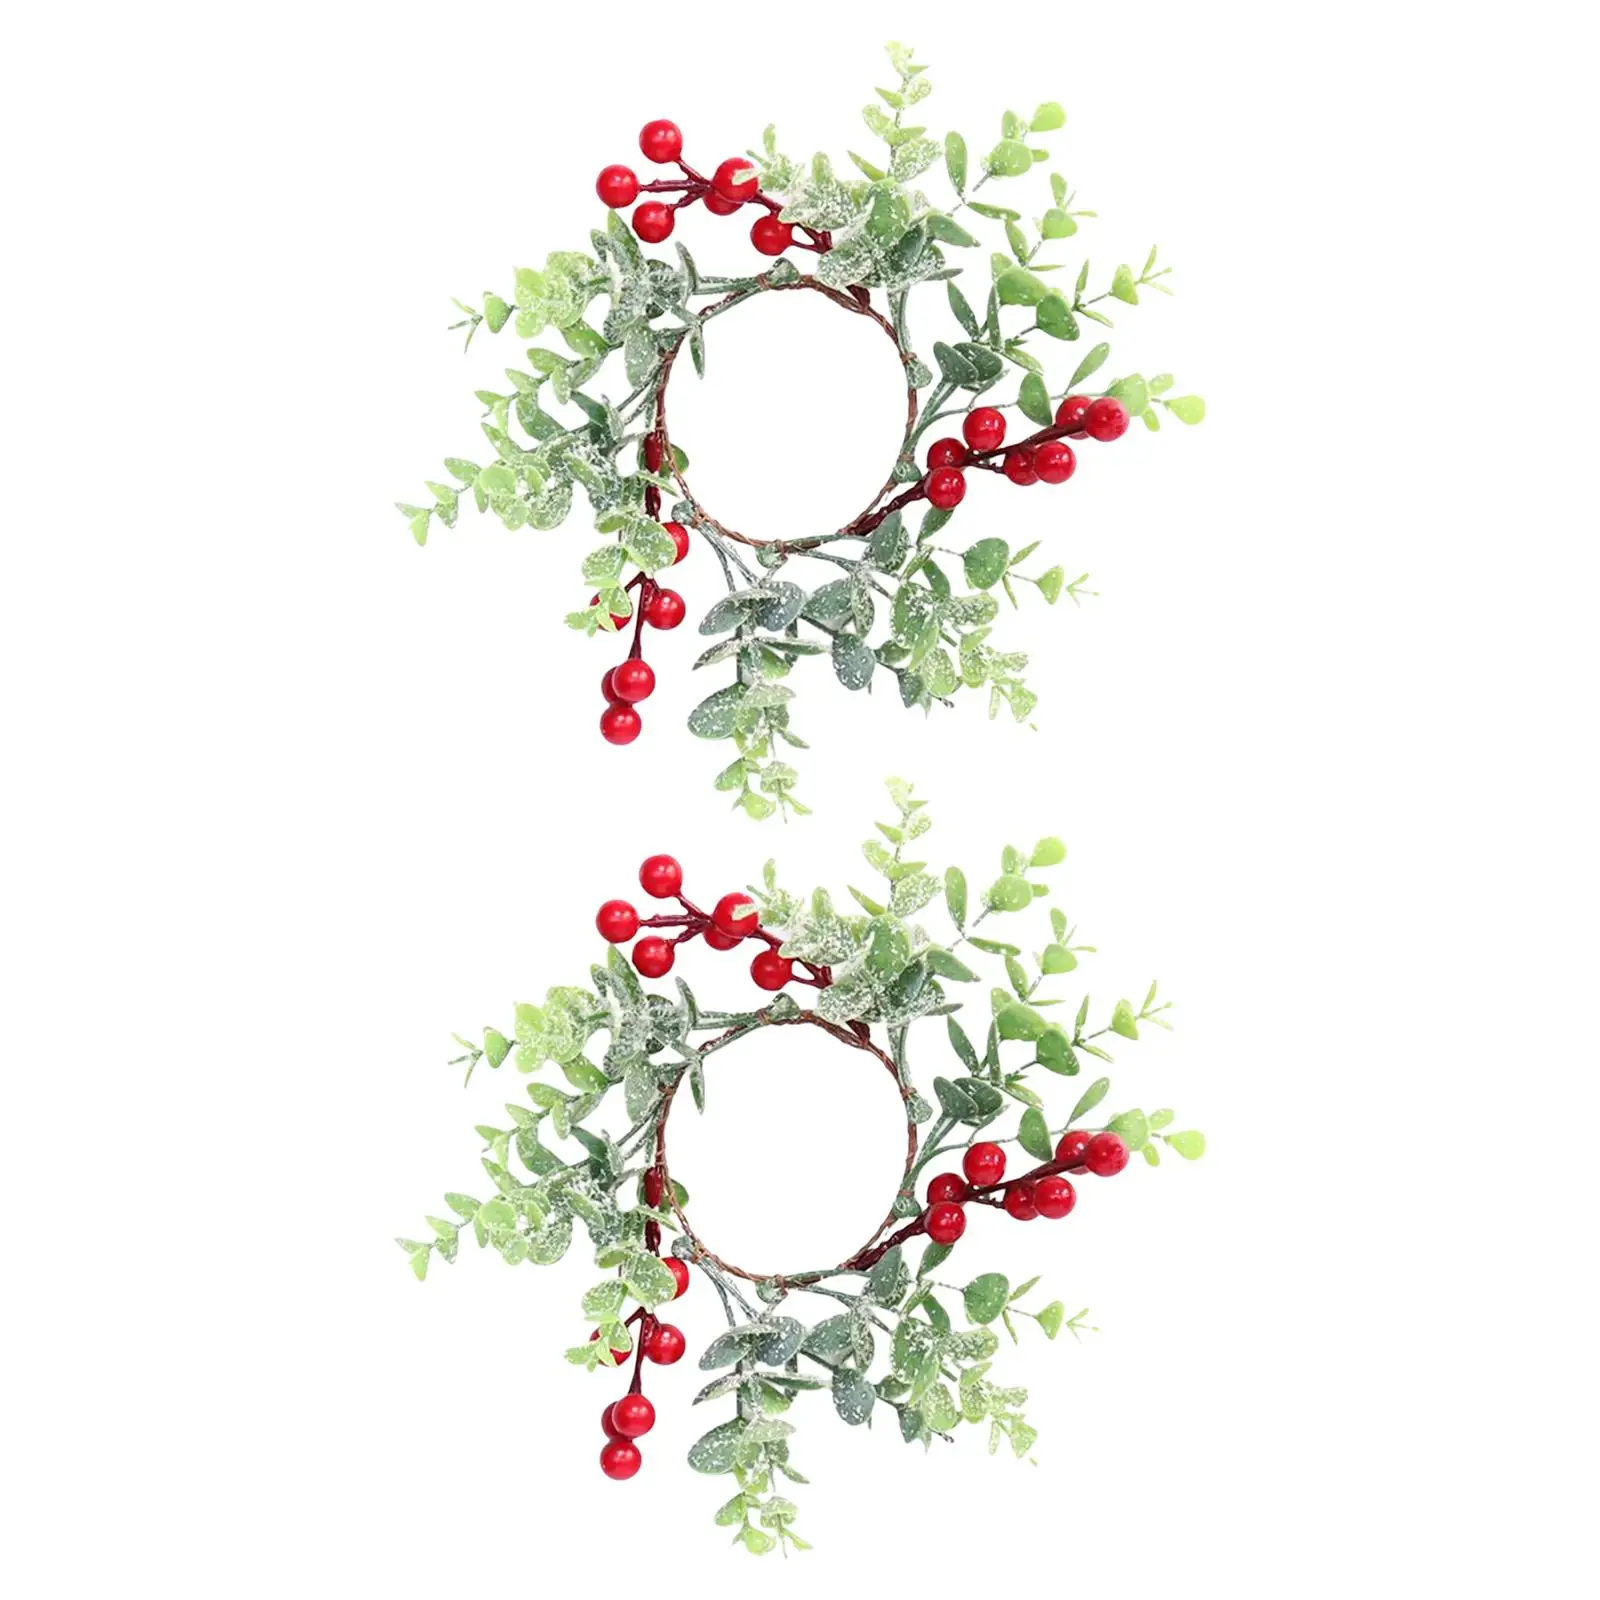 2 Pieces Easter Candle Rings Candles Pillar Simulated Creative Eucalyptus Wreath for Home Decor Dinner Living Room Gift Wedding